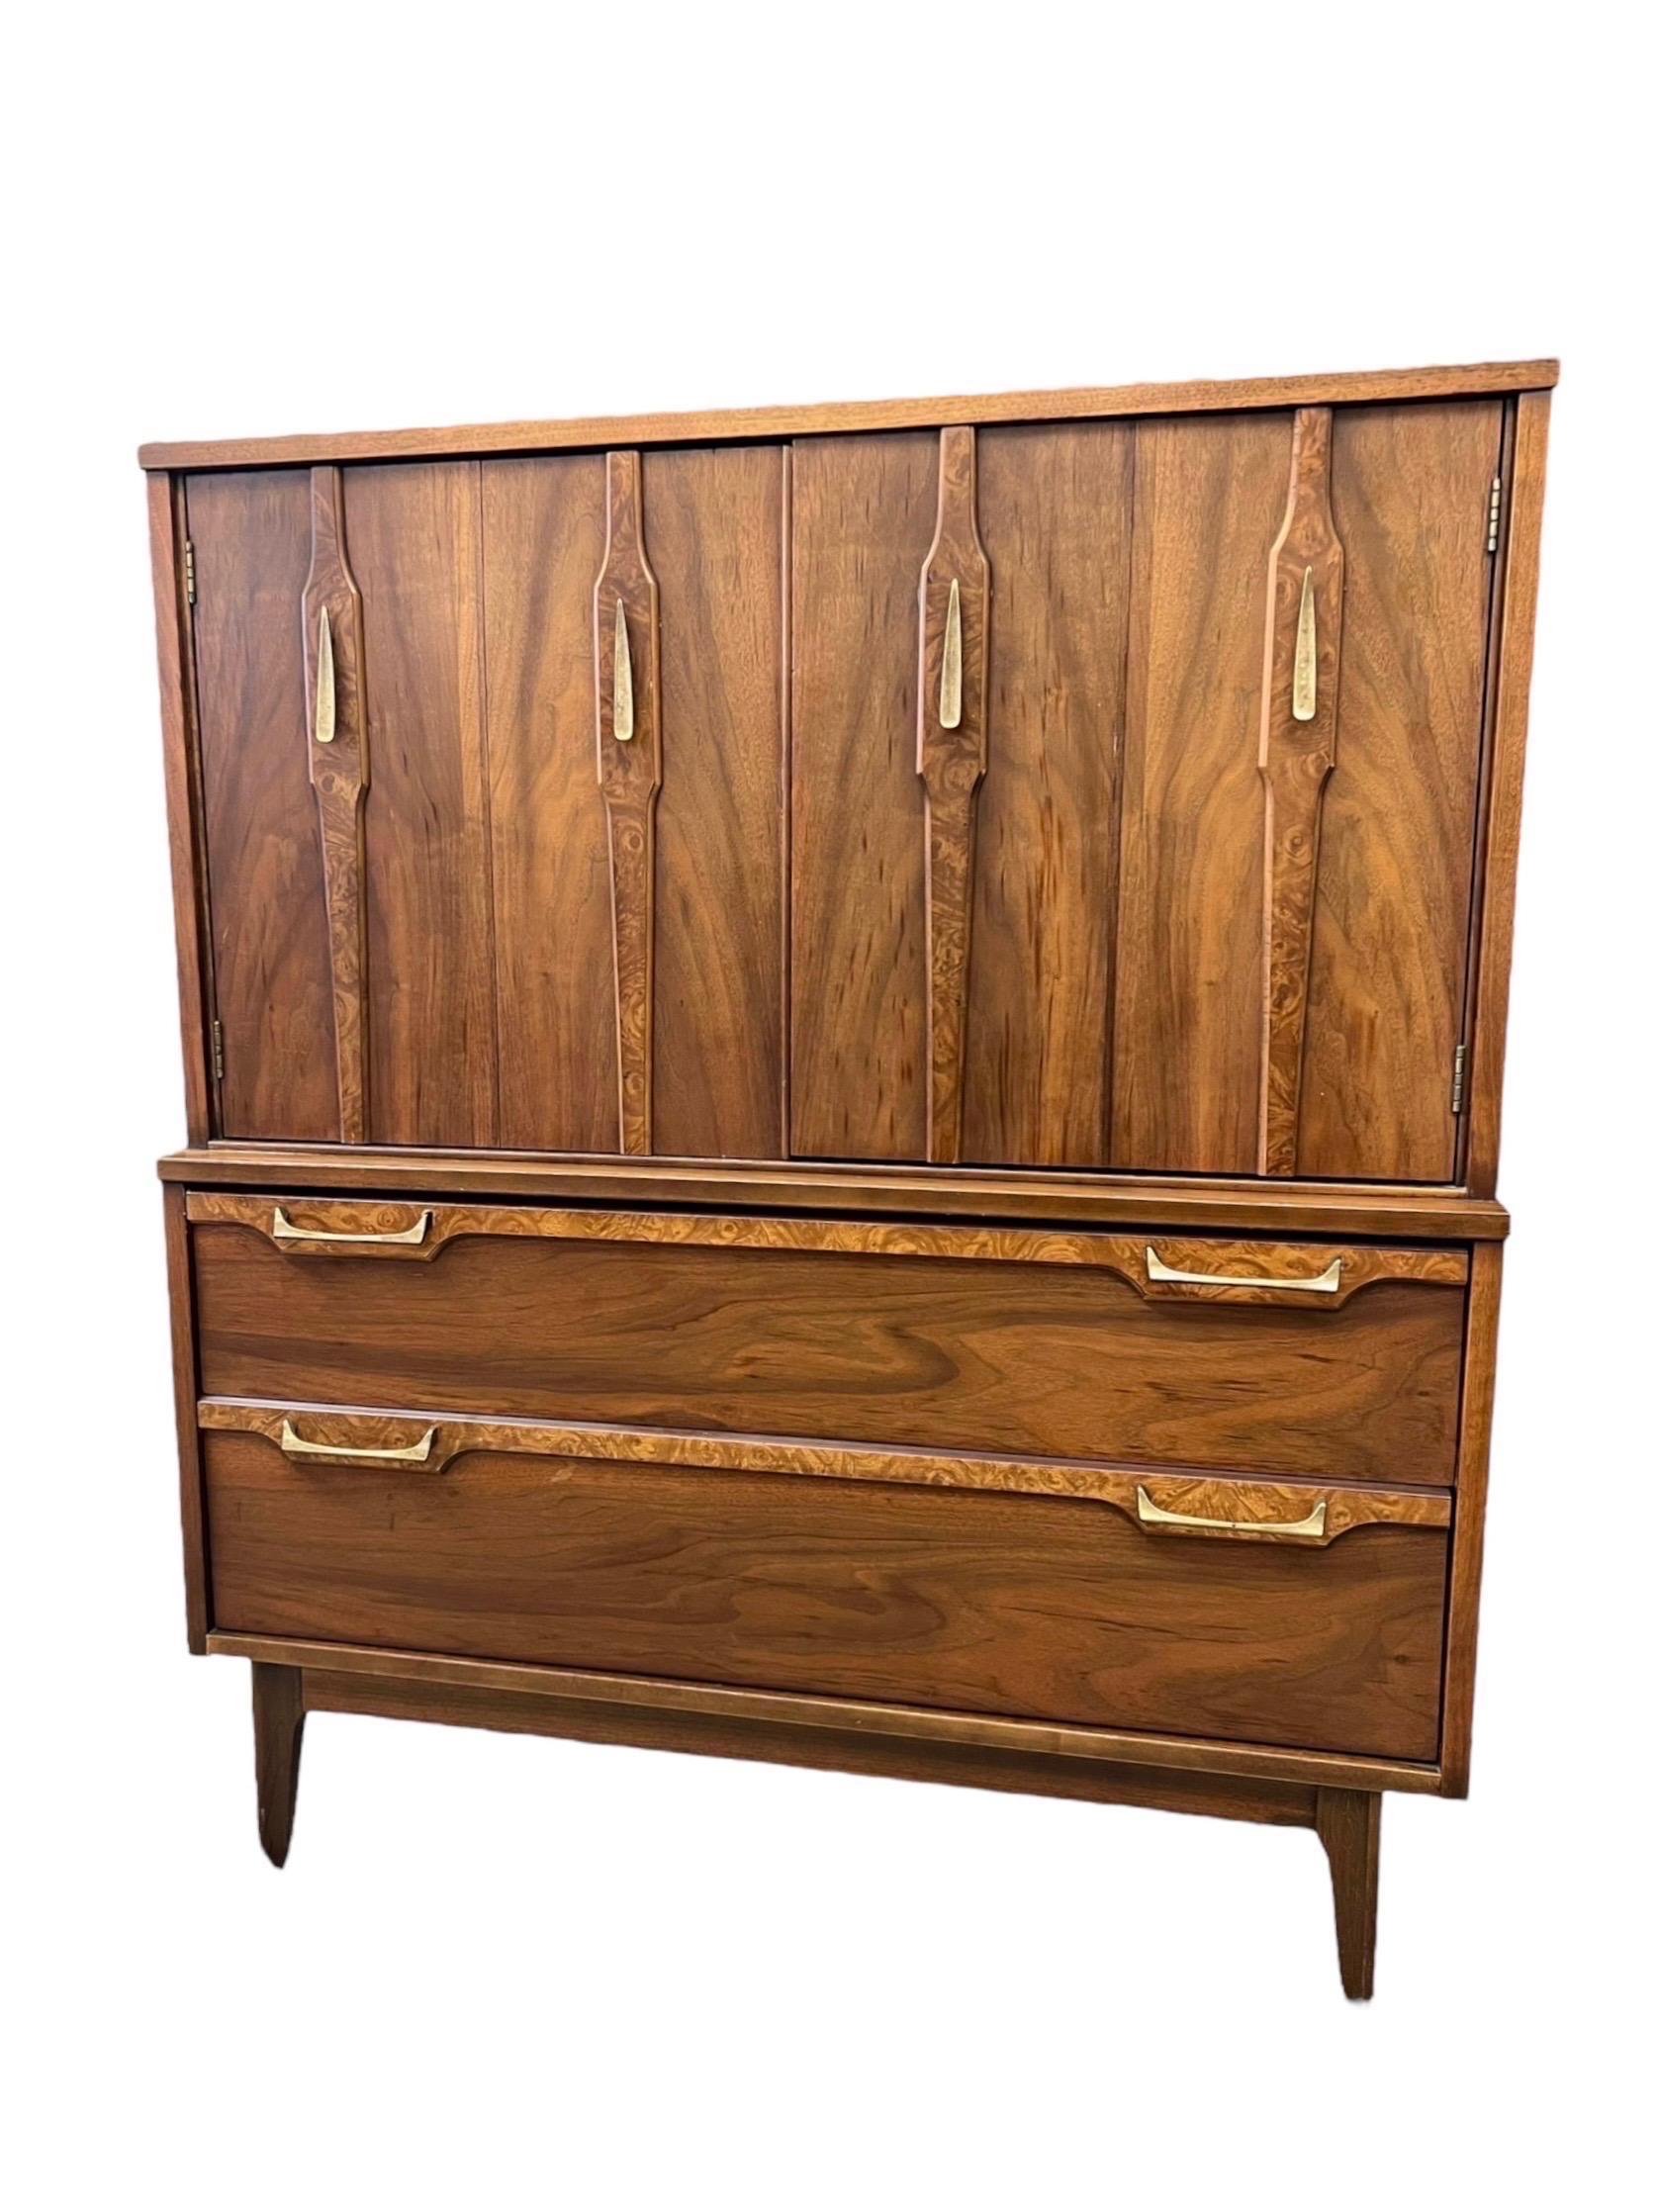 This MCM Dresser Set Features Contrasting Wood and Burl Veneer Accents , Solid Brass Hardware and a Gorgeous Wood Grain. The Dressers and End Tables are Structurally Sound and Smooth Sliding Drawers.

Dimensions. Tallboy. 40 W ; 18 D ; 47 H
        